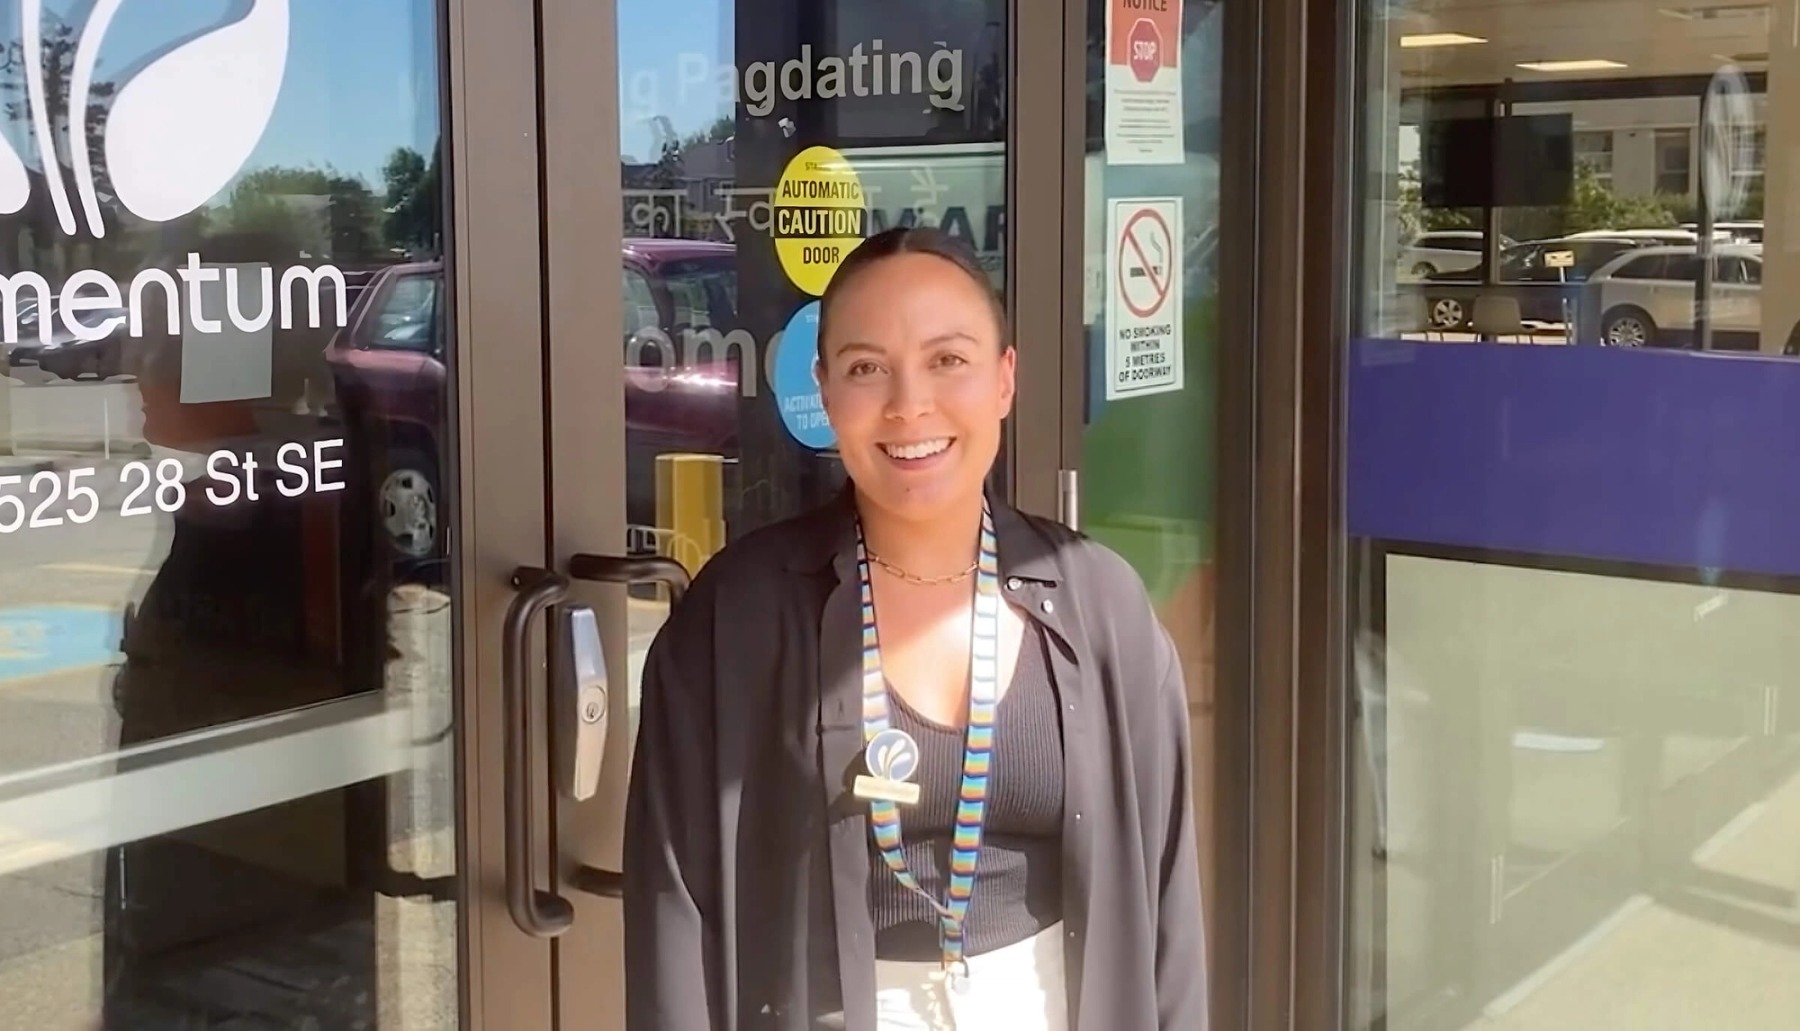 A woman wearing a Momentum badge stands in front of the organization's front door, prepared to record a video highlighting Momentum's career opportunities.